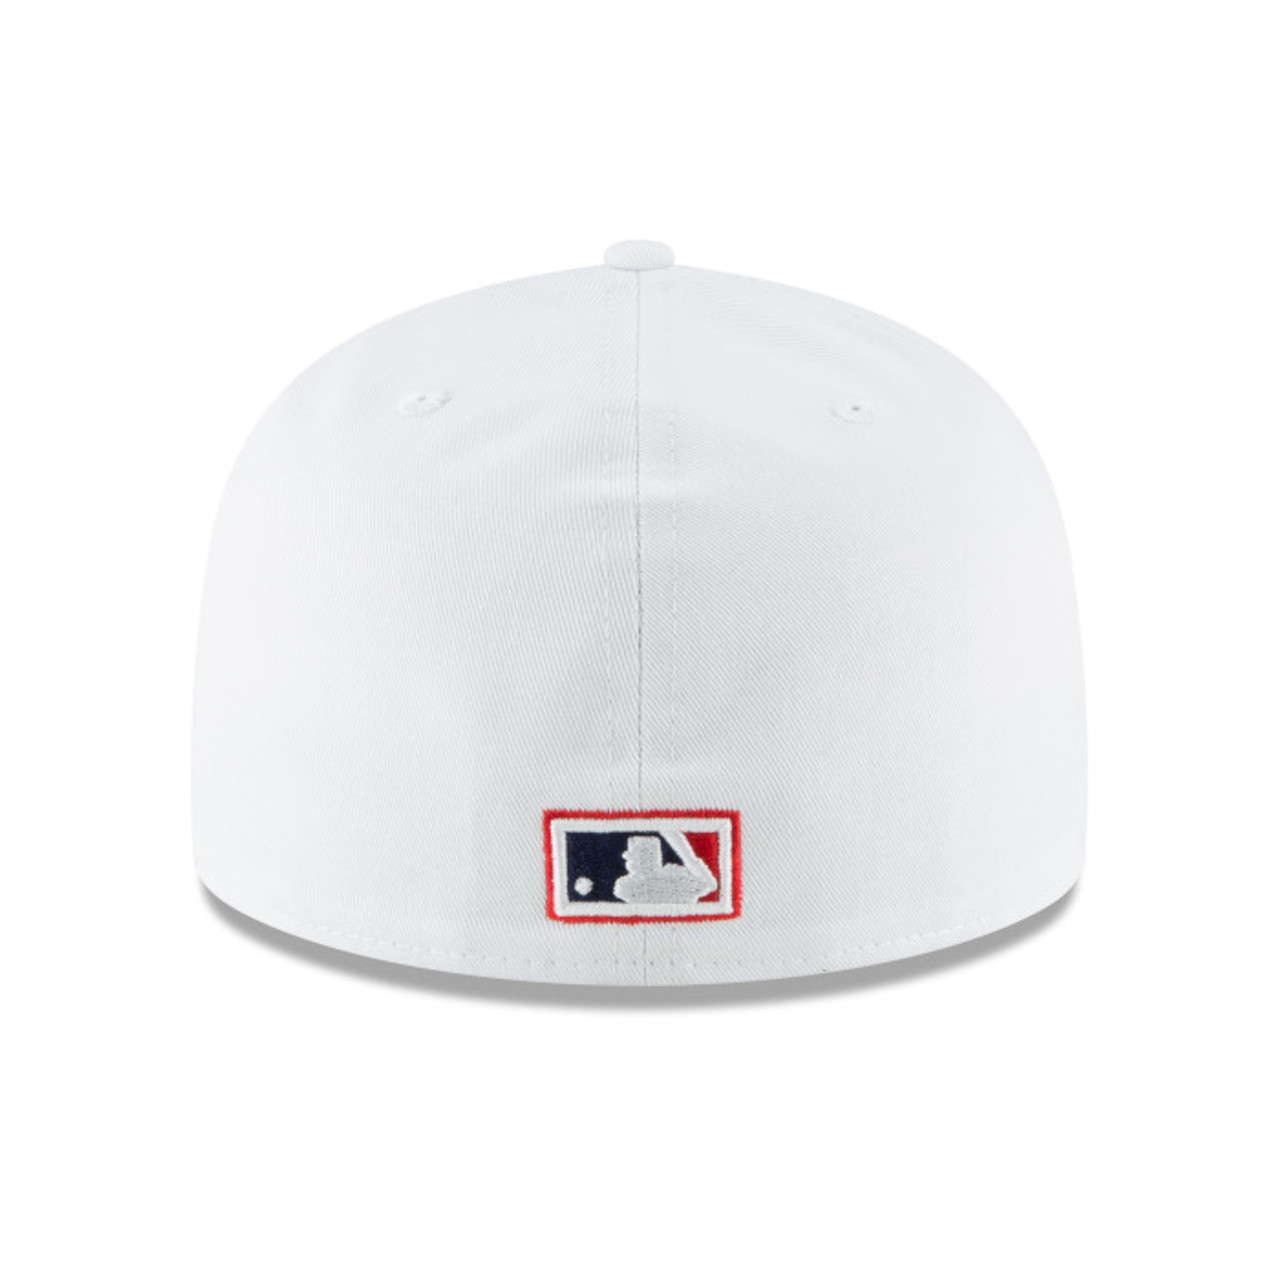  OC Sports Chicago White Sox Adult Cooperstown